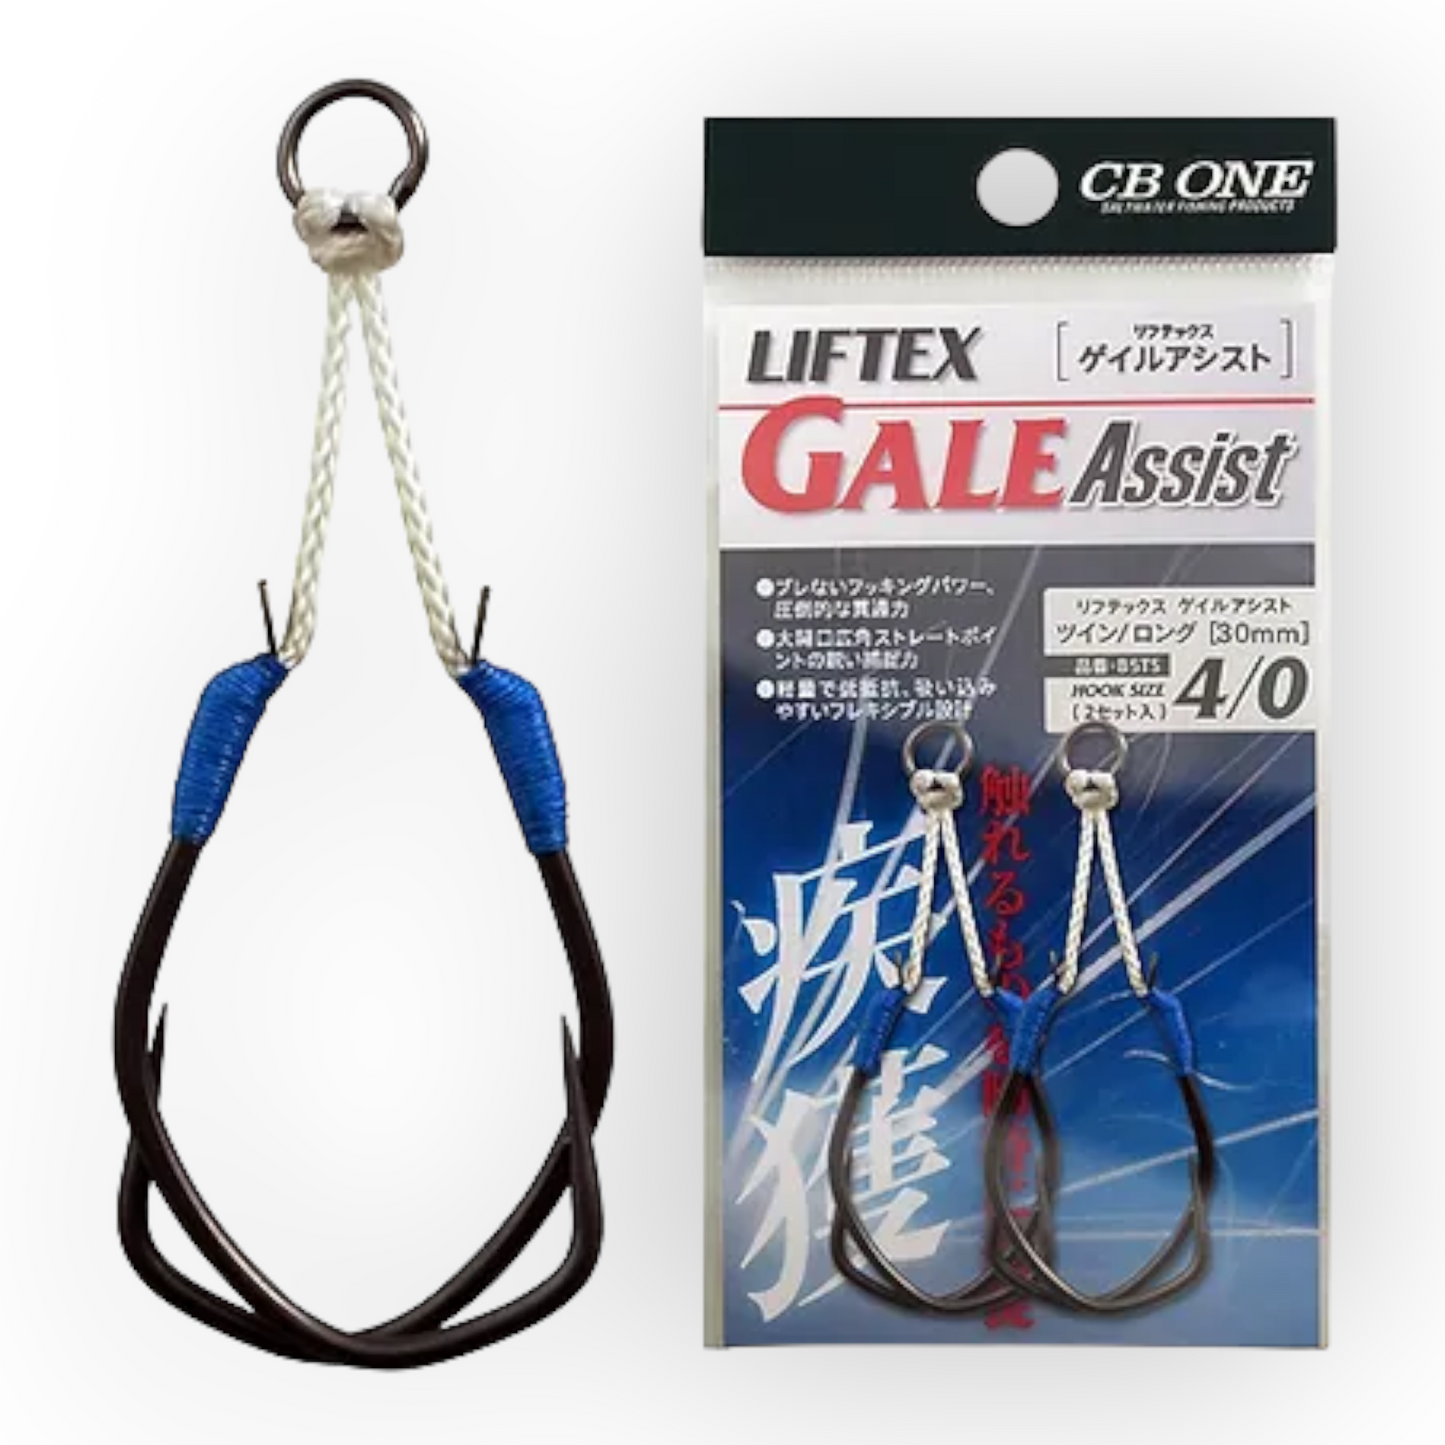 CB ONE LIFTEX GALE Twin Assist